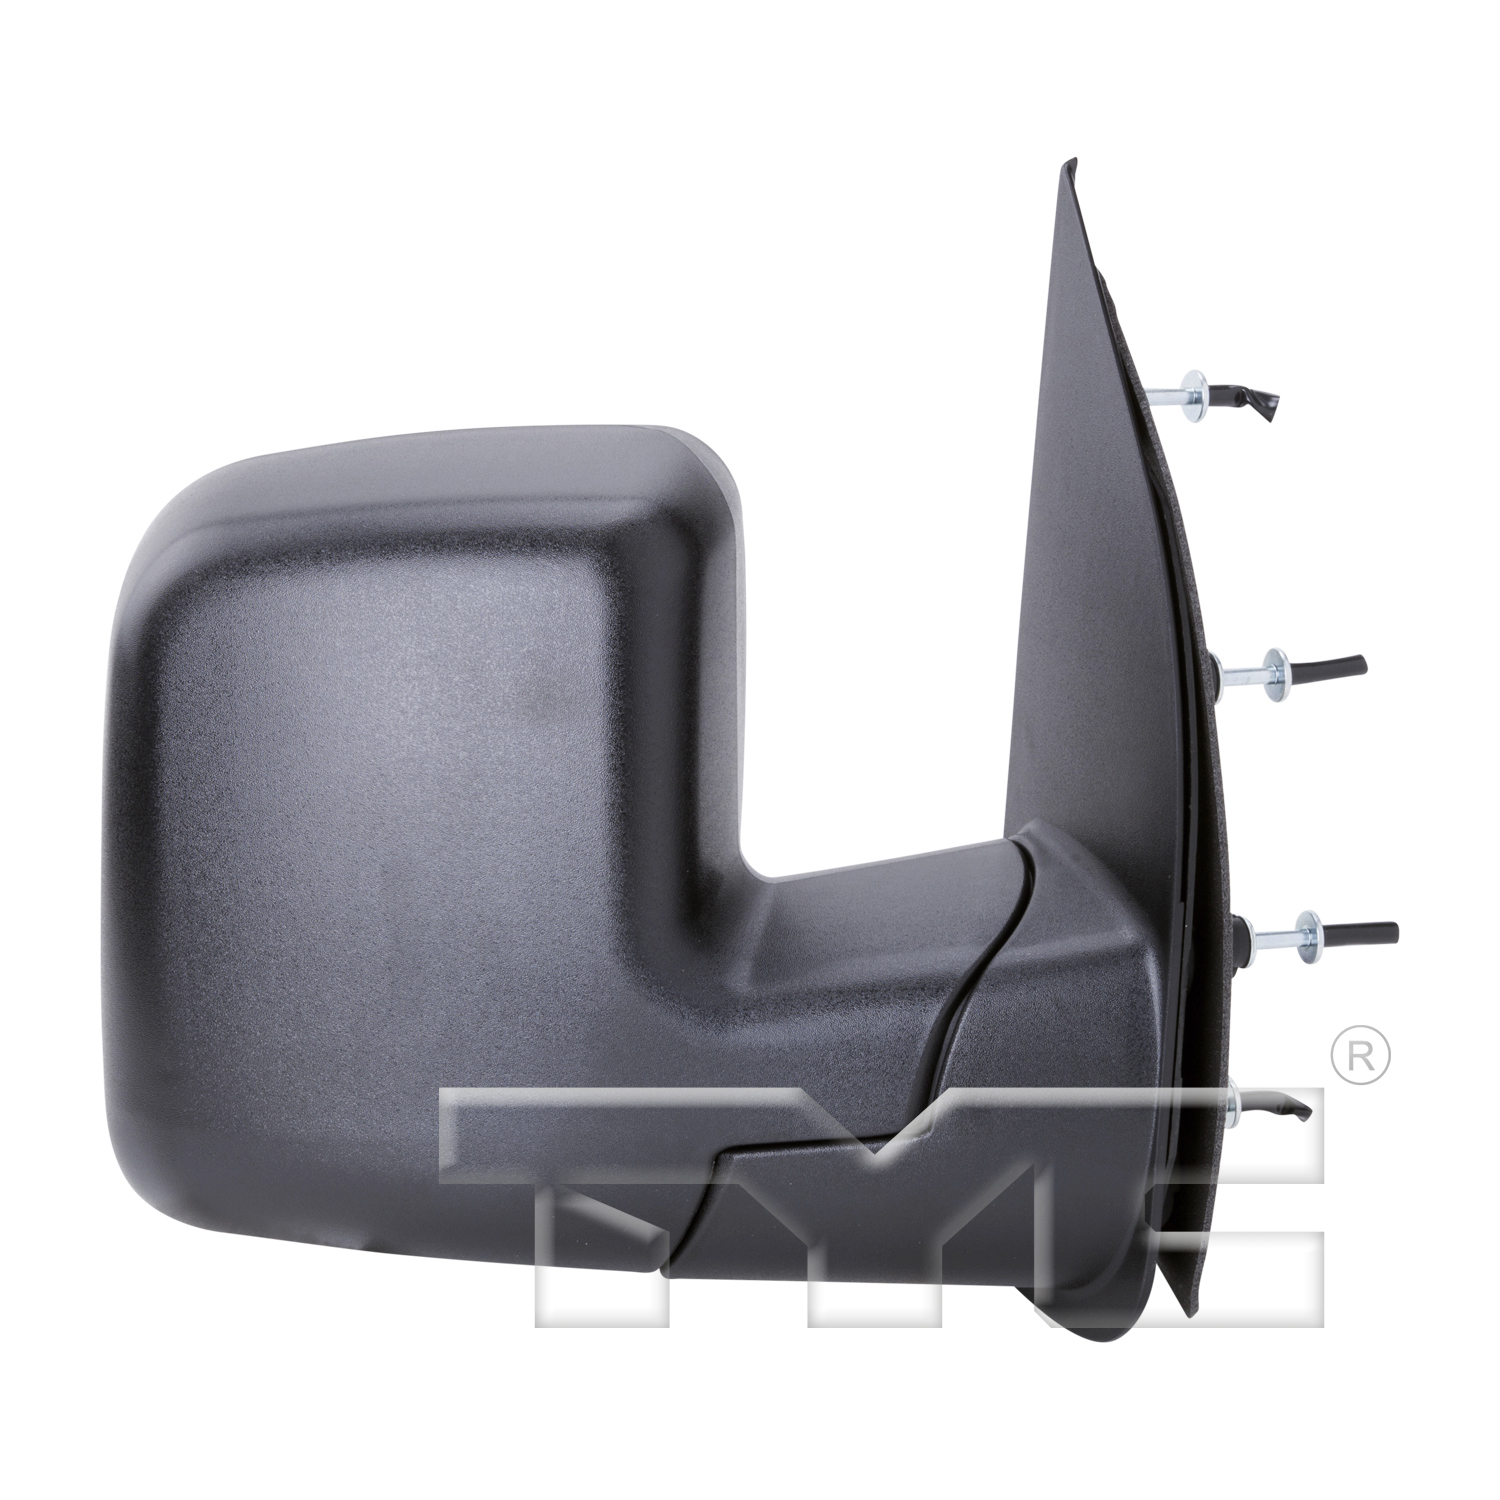 Aftermarket MIRRORS for FORD - E-150 ECONOLINE CLUB WAGON, E-150 ECONOLINE CLUB WAGON,02-02,RT Mirror outside rear view